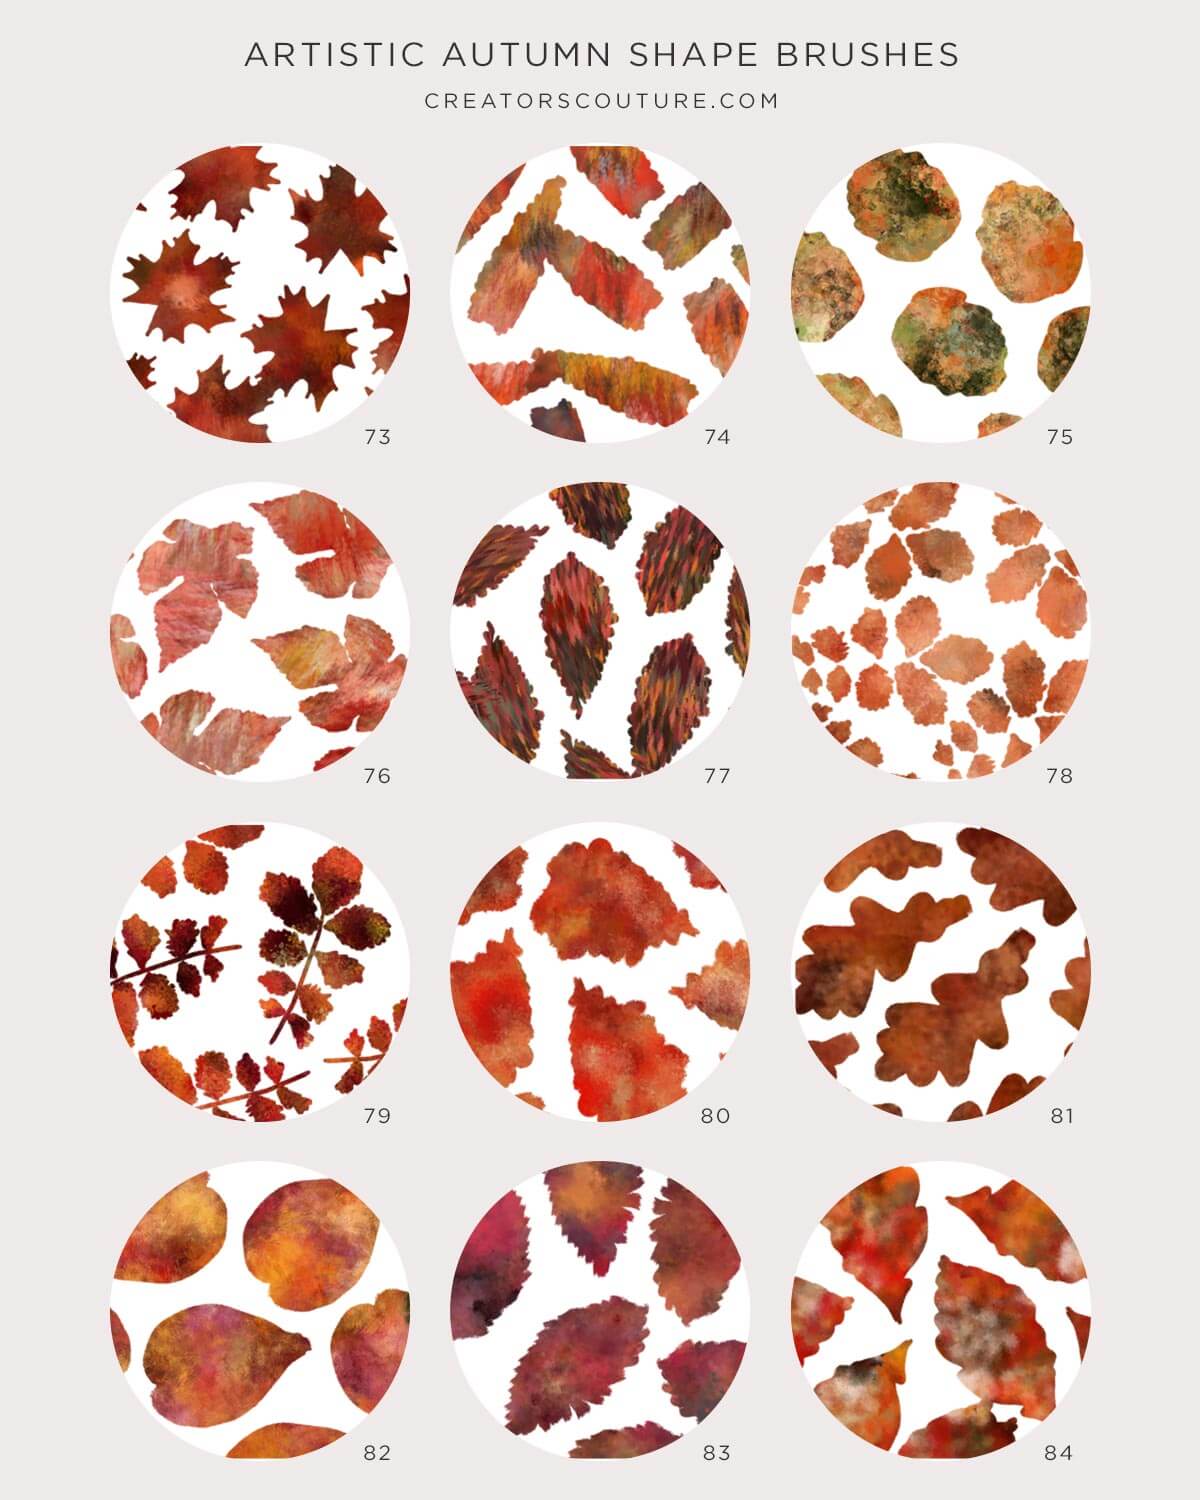 Photoshop stamped brushes in leaf shapes, brush chart of brushes 73 through 84 